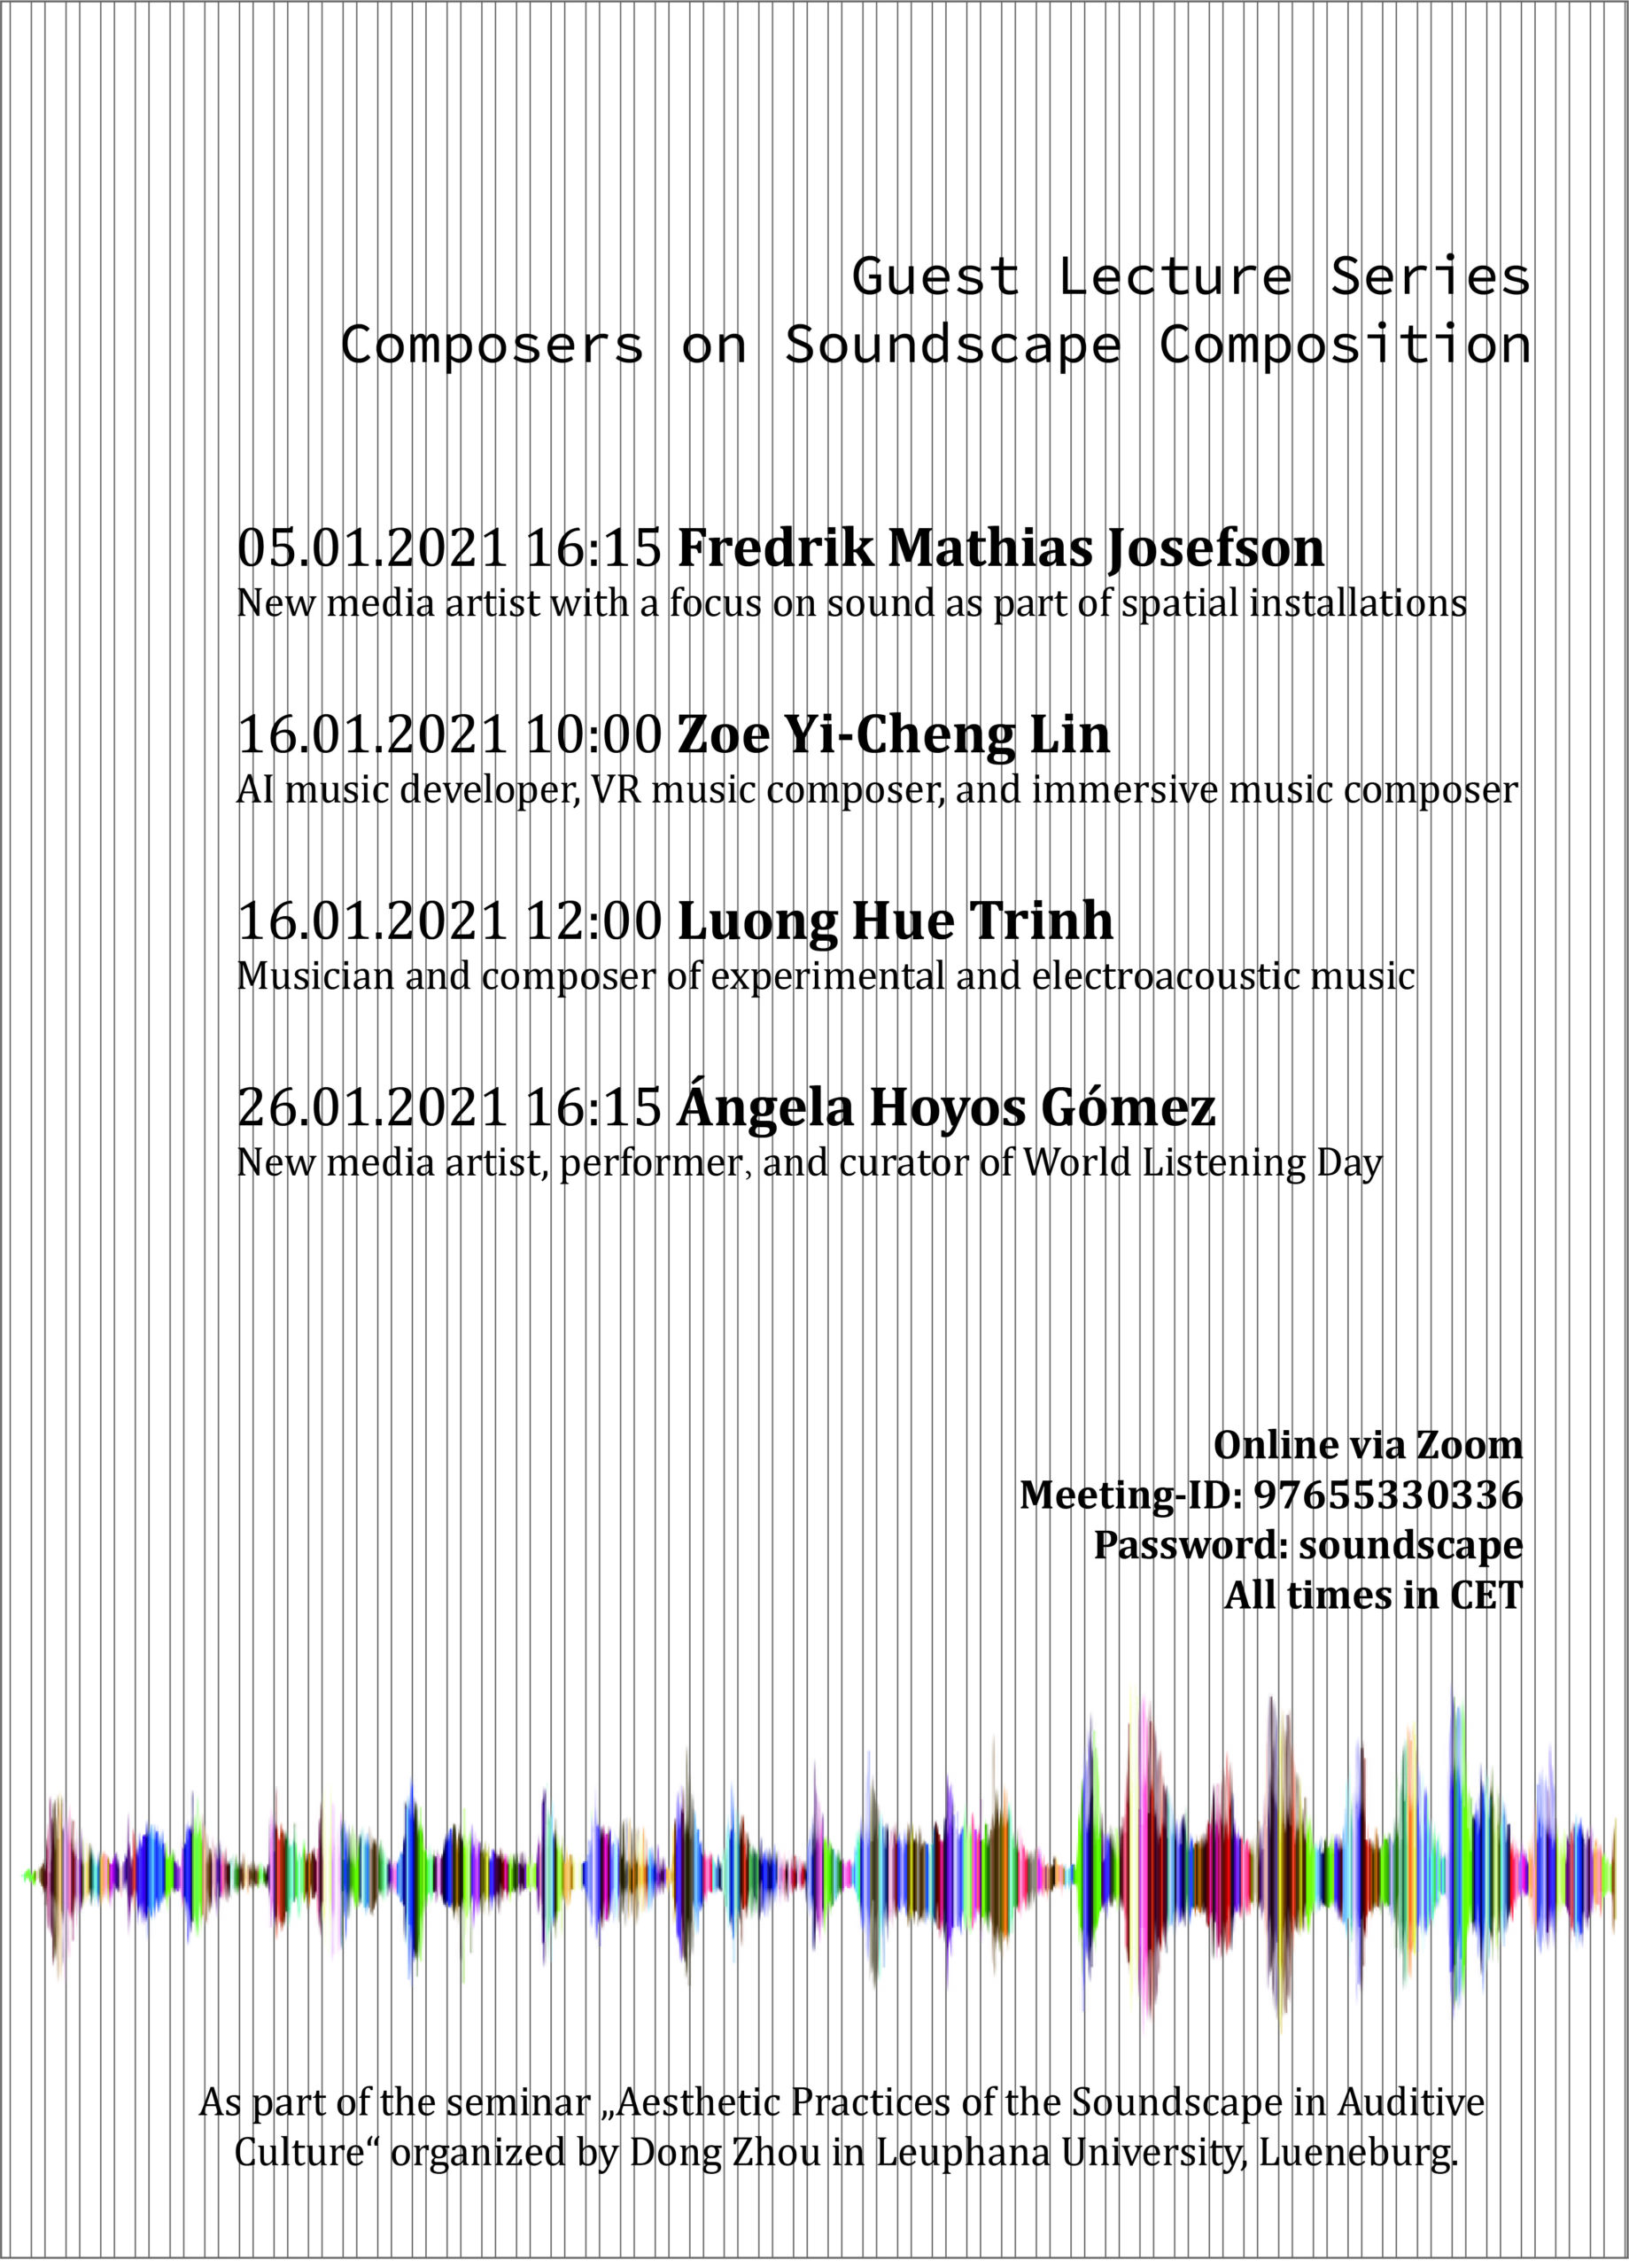 Guest Lecture Series: Composers on Soundscape Composition